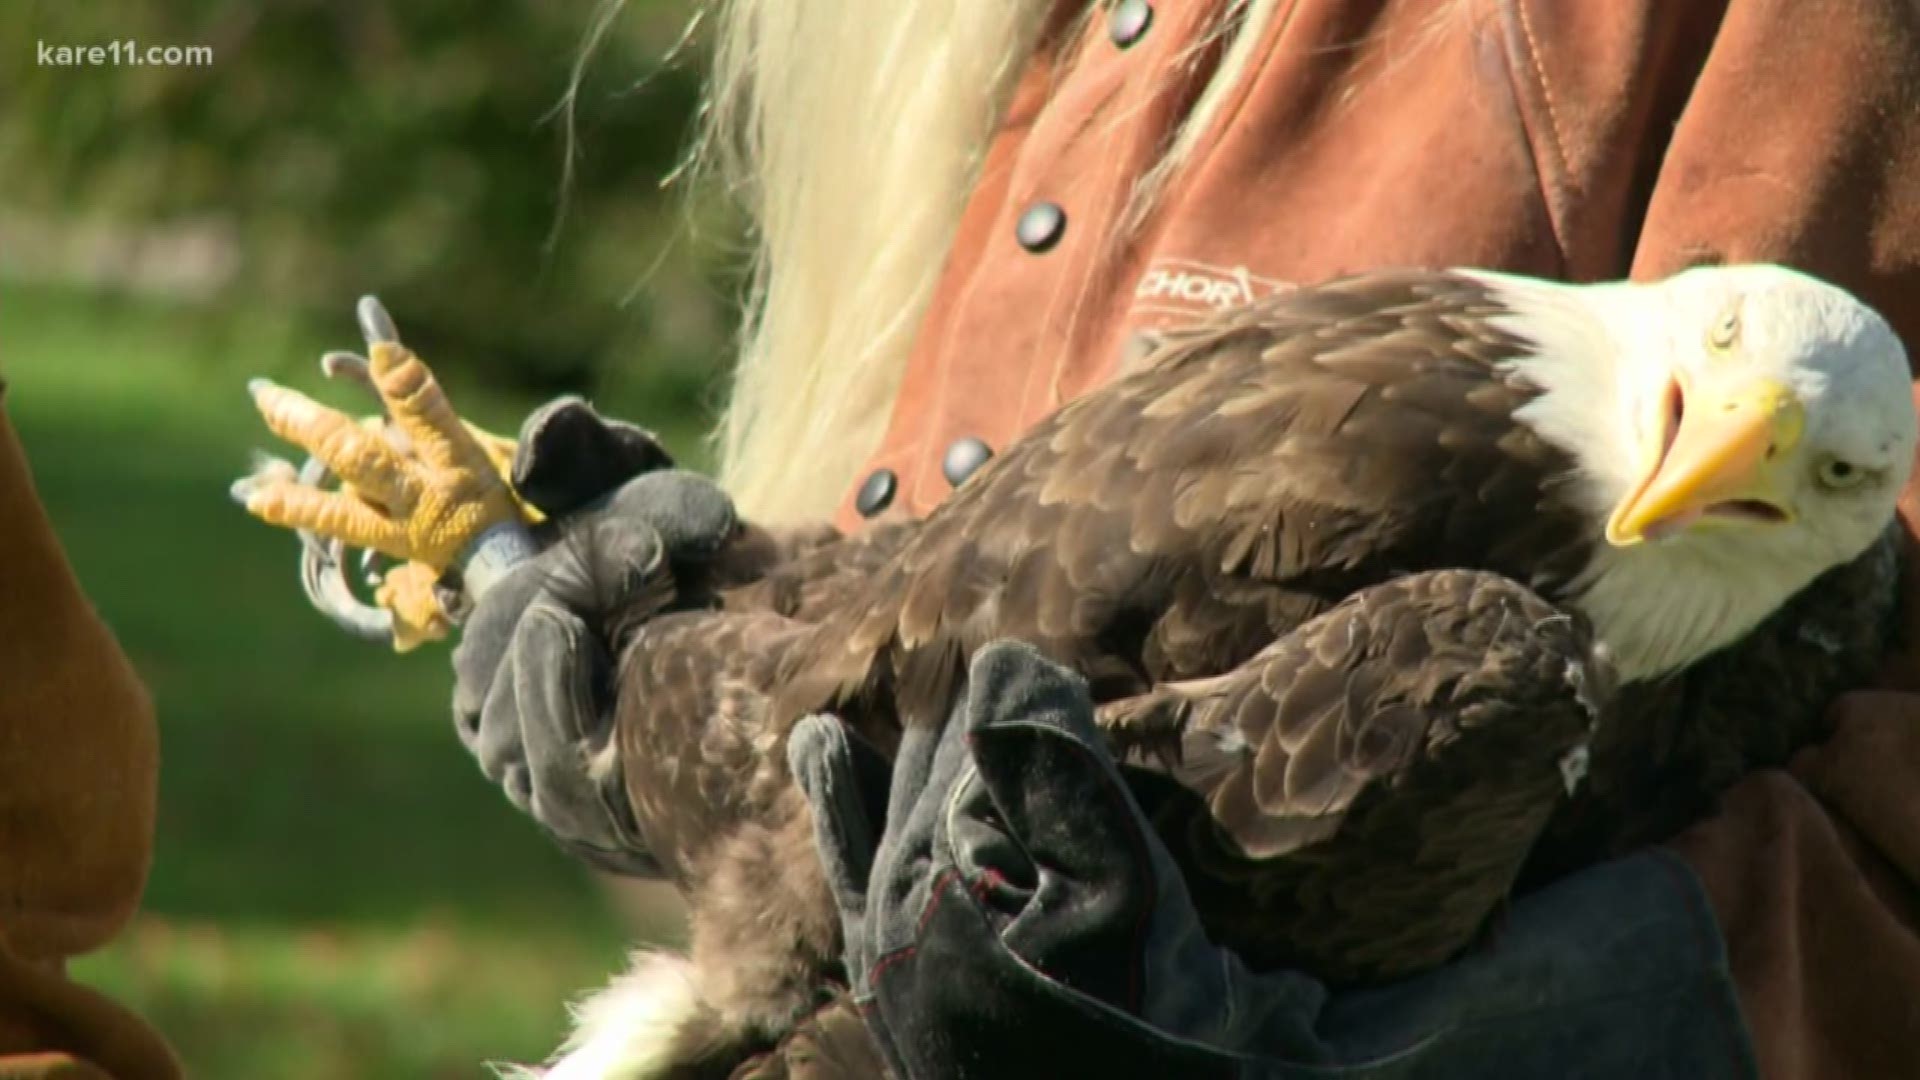 Rescued bald eagle returns to the wild | kare11.com